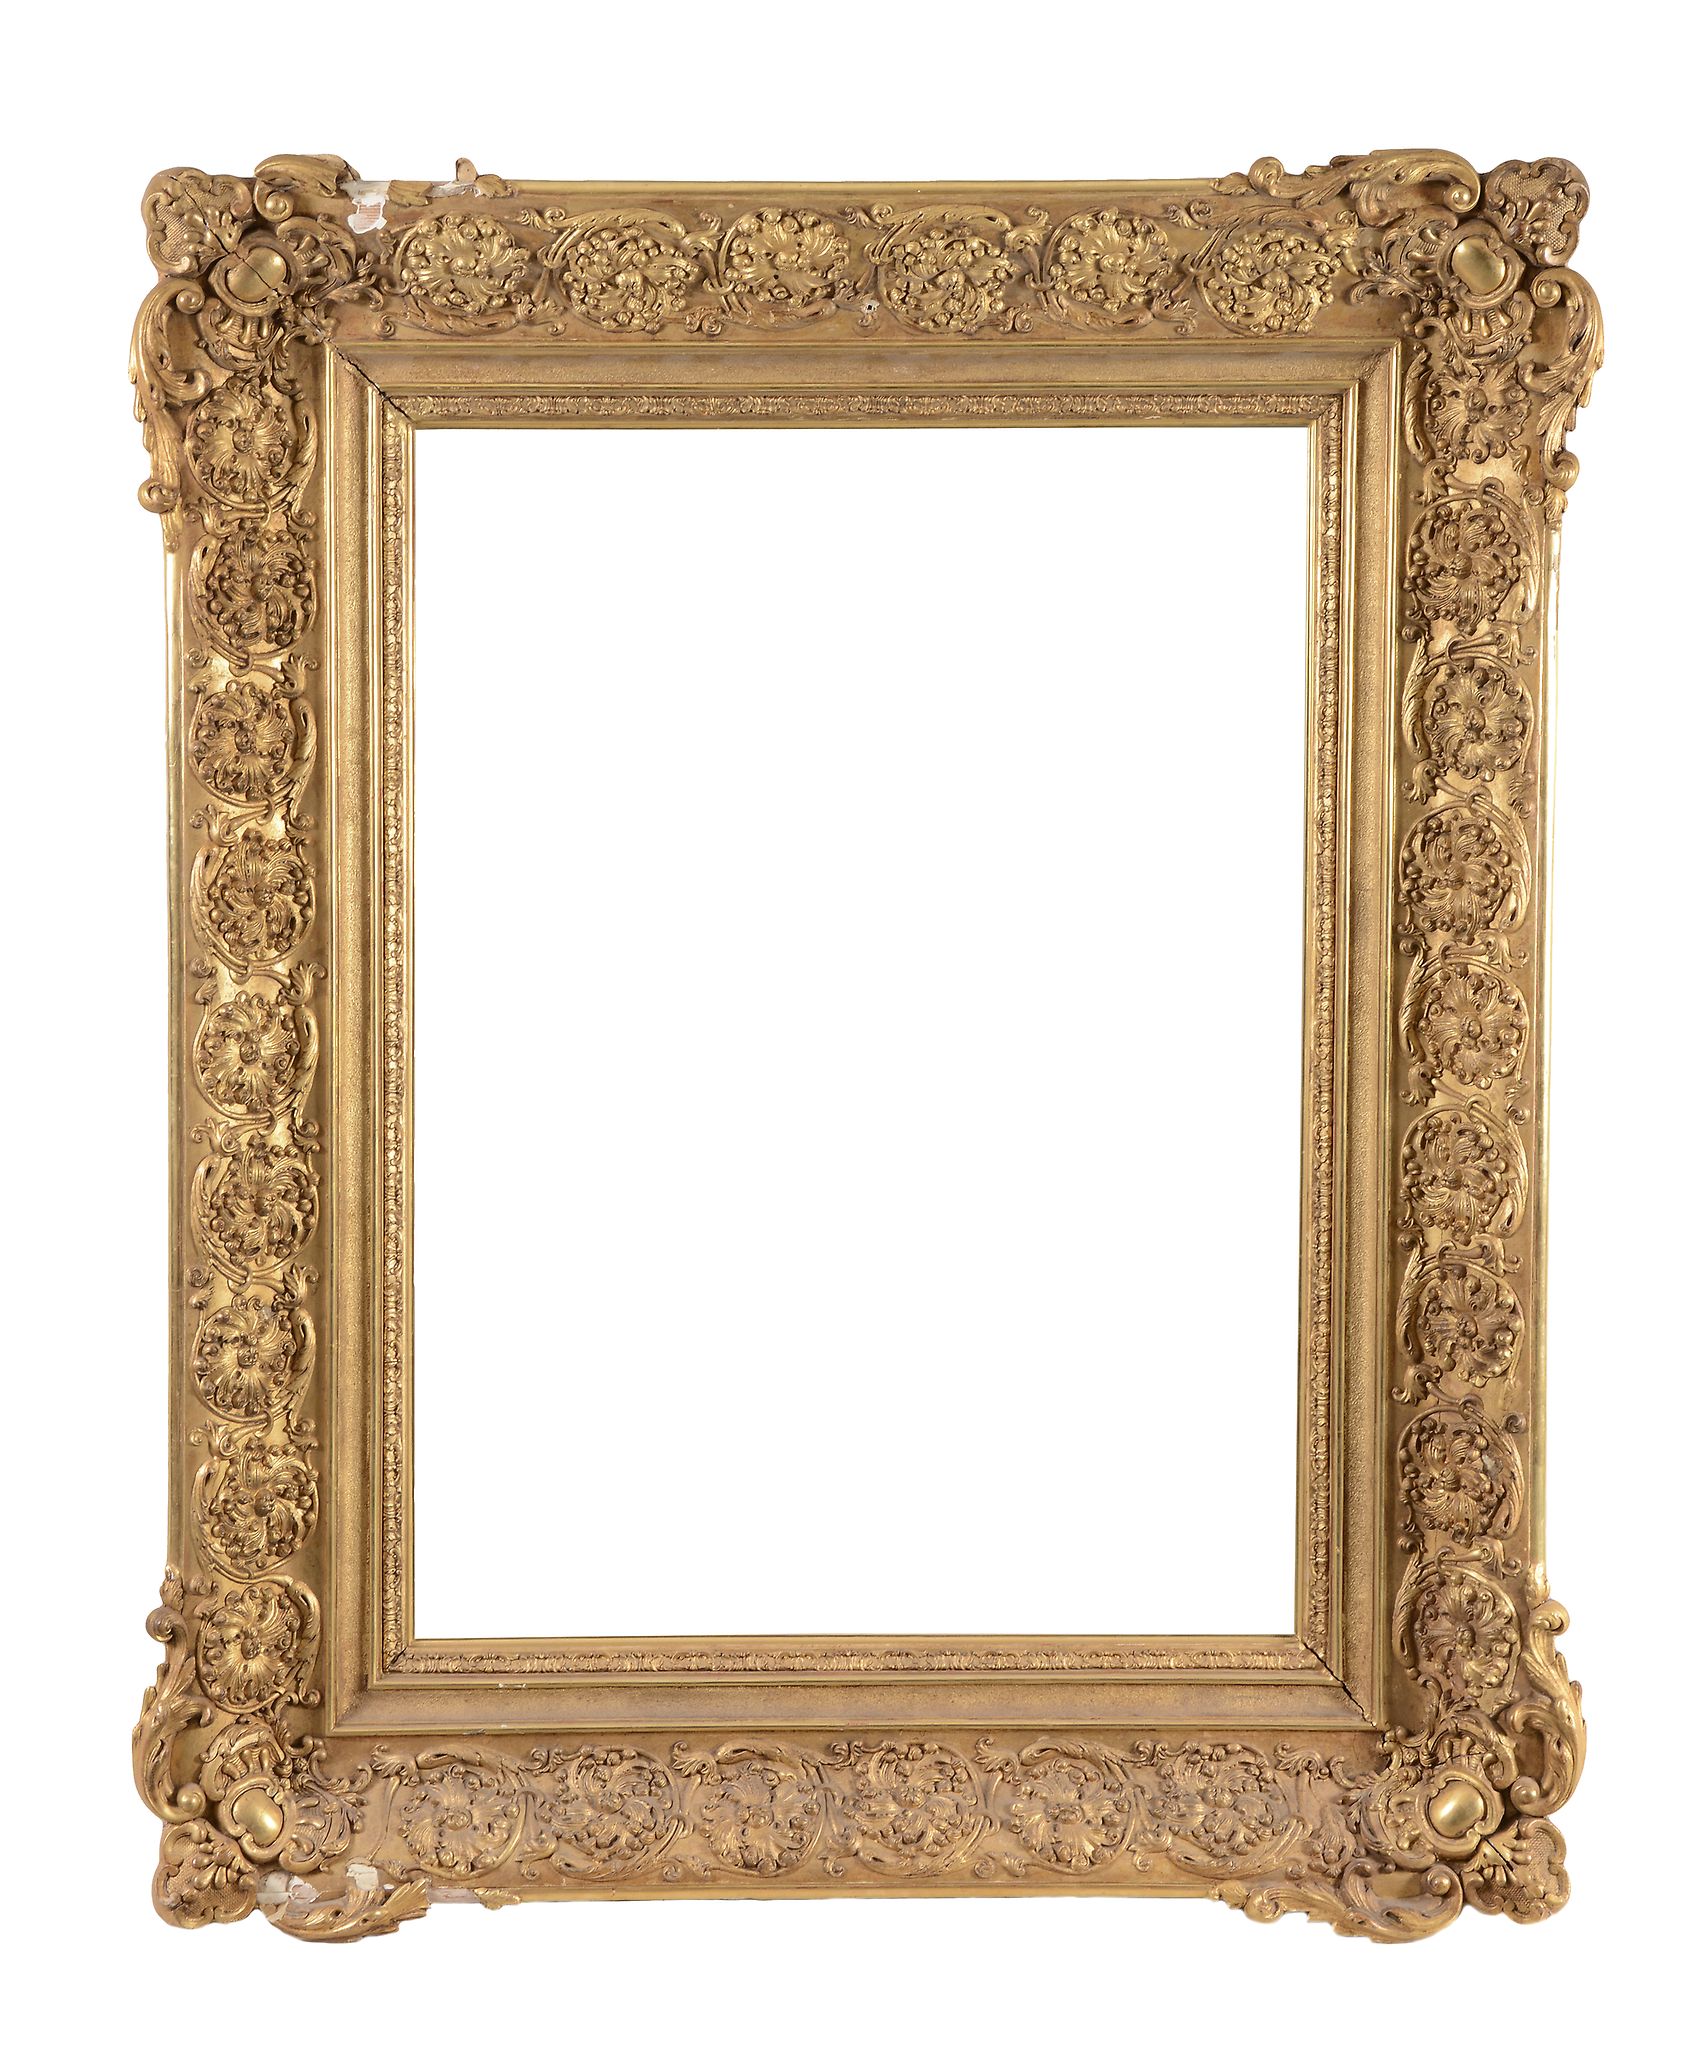 A 20th century gilt composition frame - in c.1700 style overall dimensions: 41 x 52 1/2 in., 104.2 x